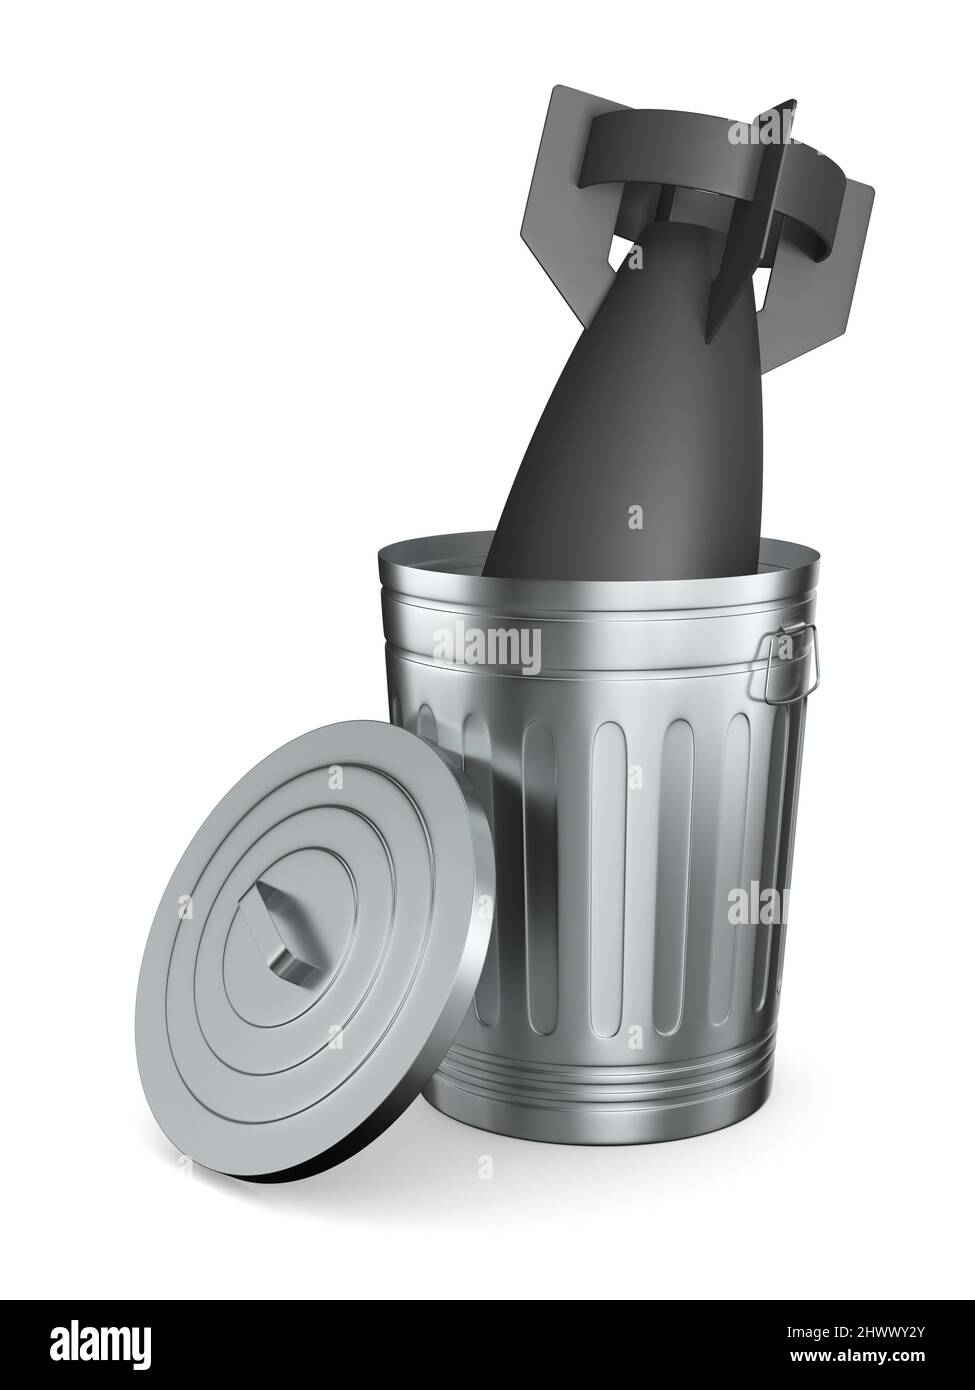 Aerial bomb into garbage bin on white background. Isolated 3D illustration Stock Photo